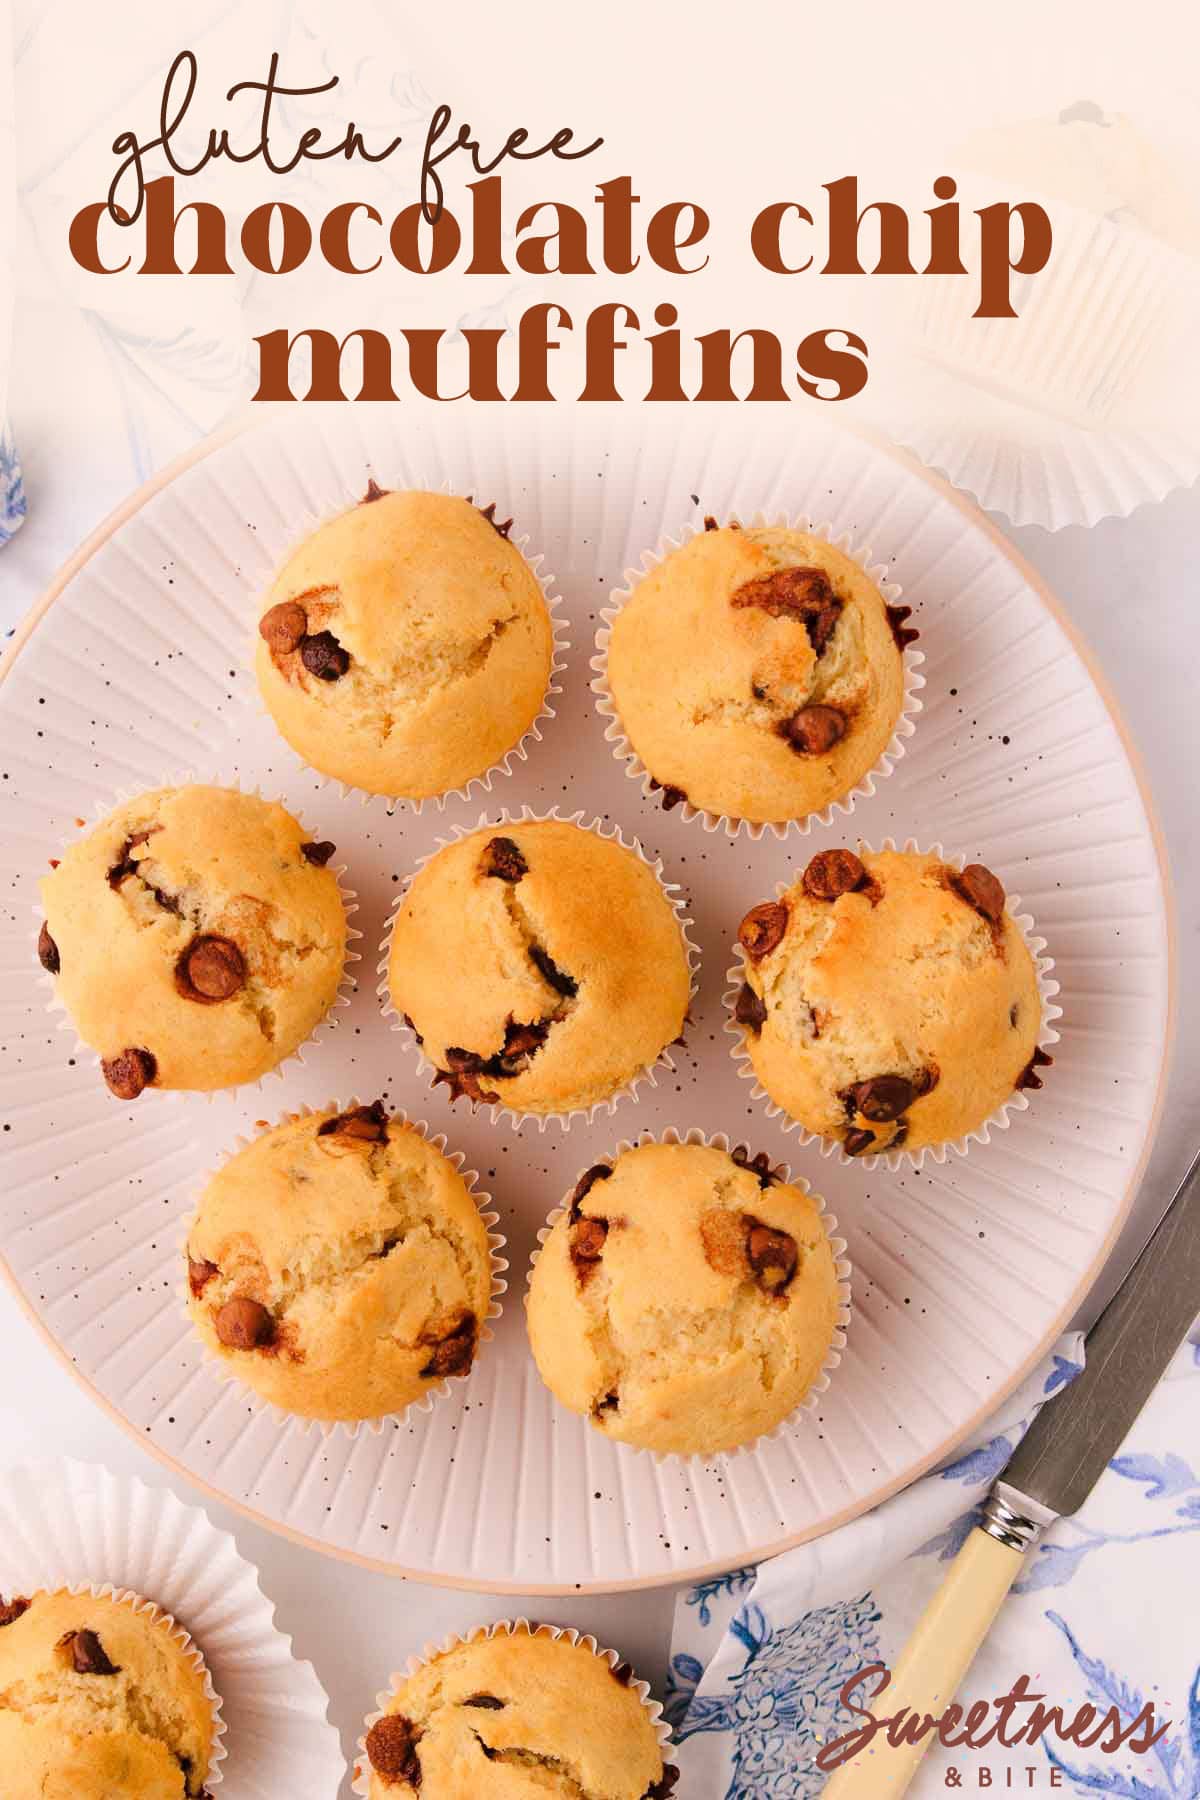 7 gluten free chocolate chip muffins arranged in a circle on a white plate with black speckles, with a blue and white napkin and a bone-handled knife.